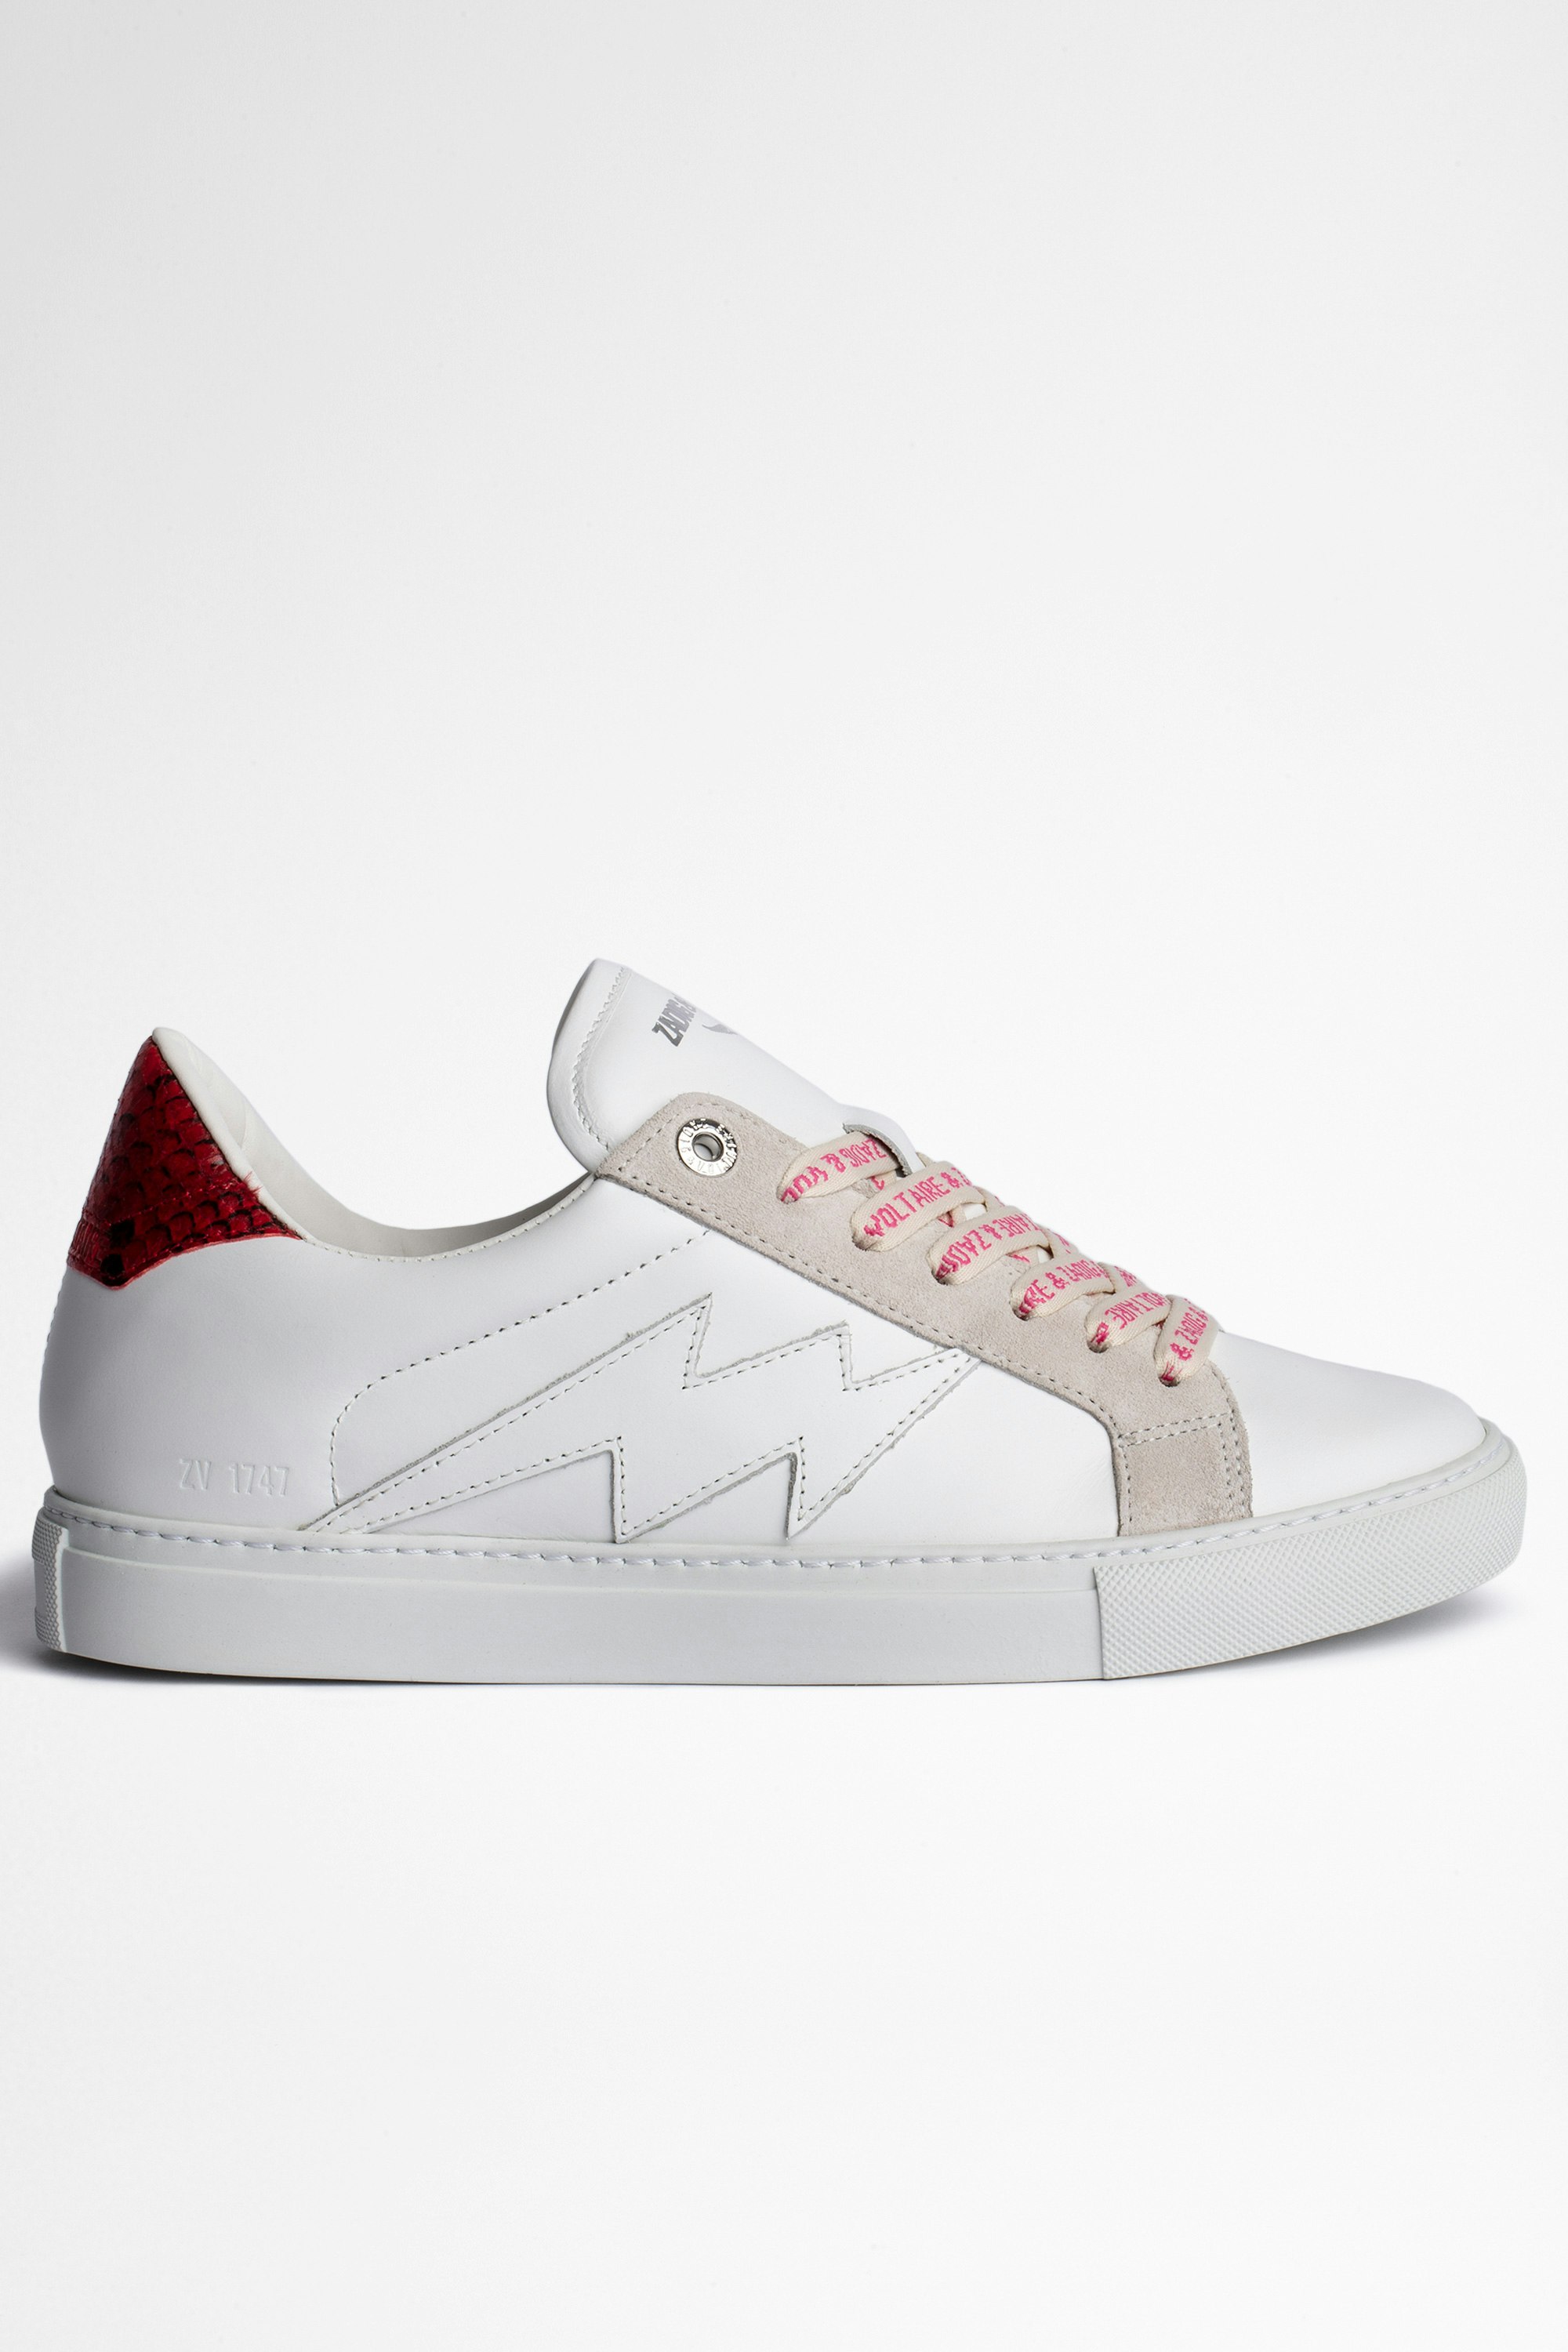 ZV1747 sneakers Leather Women's white leather trainers with lightning bolt patches